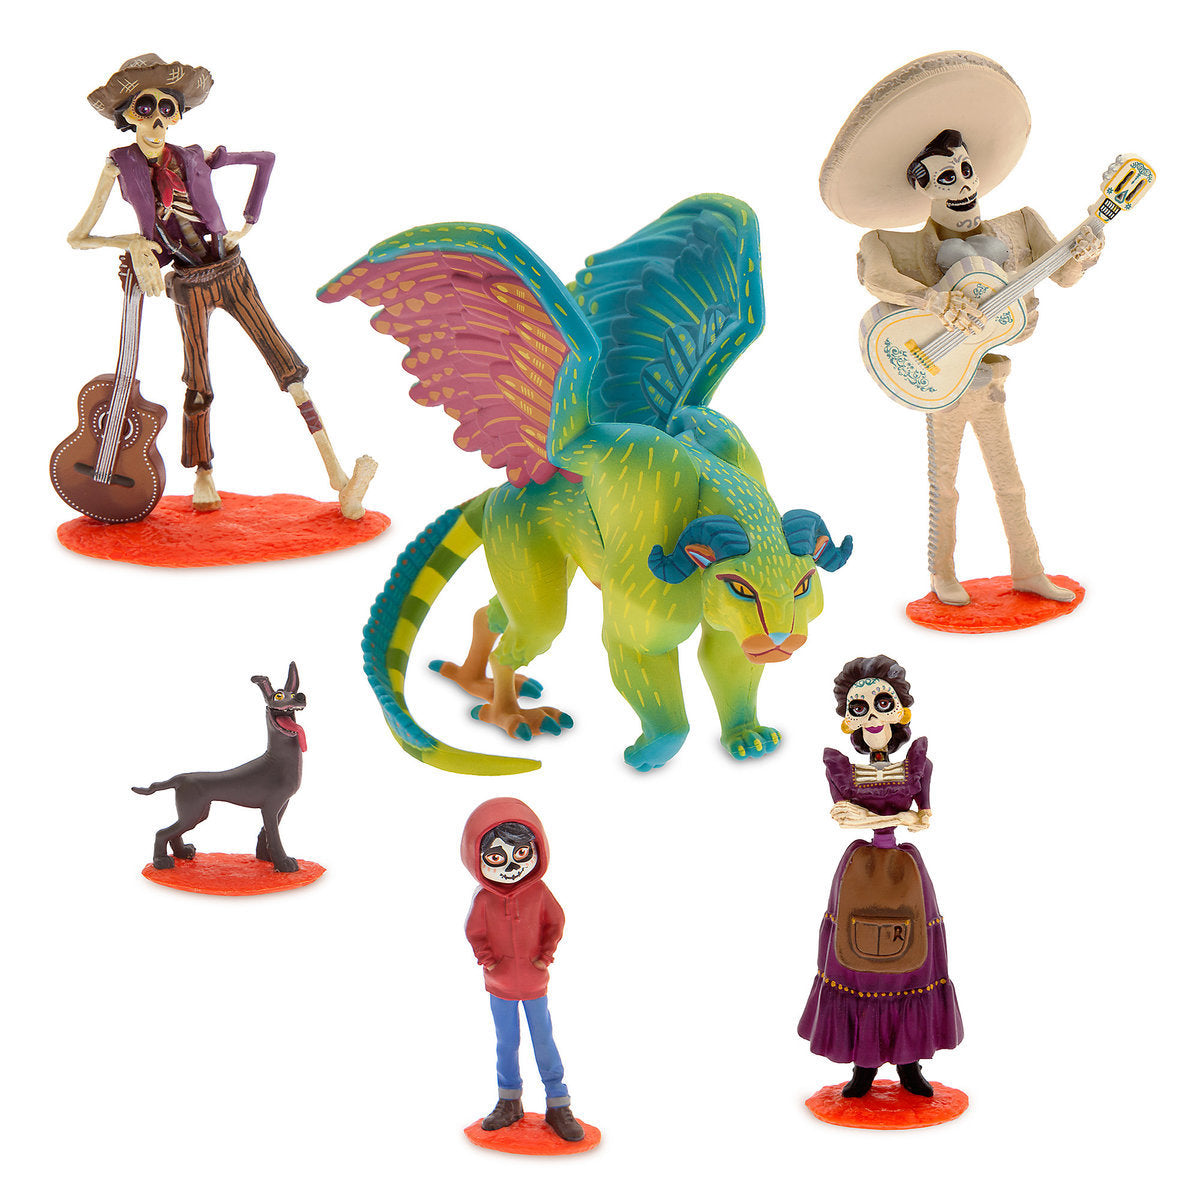 Disney Store Coco Figurine Figure Play Set 6 Playset Cake Topper New with box